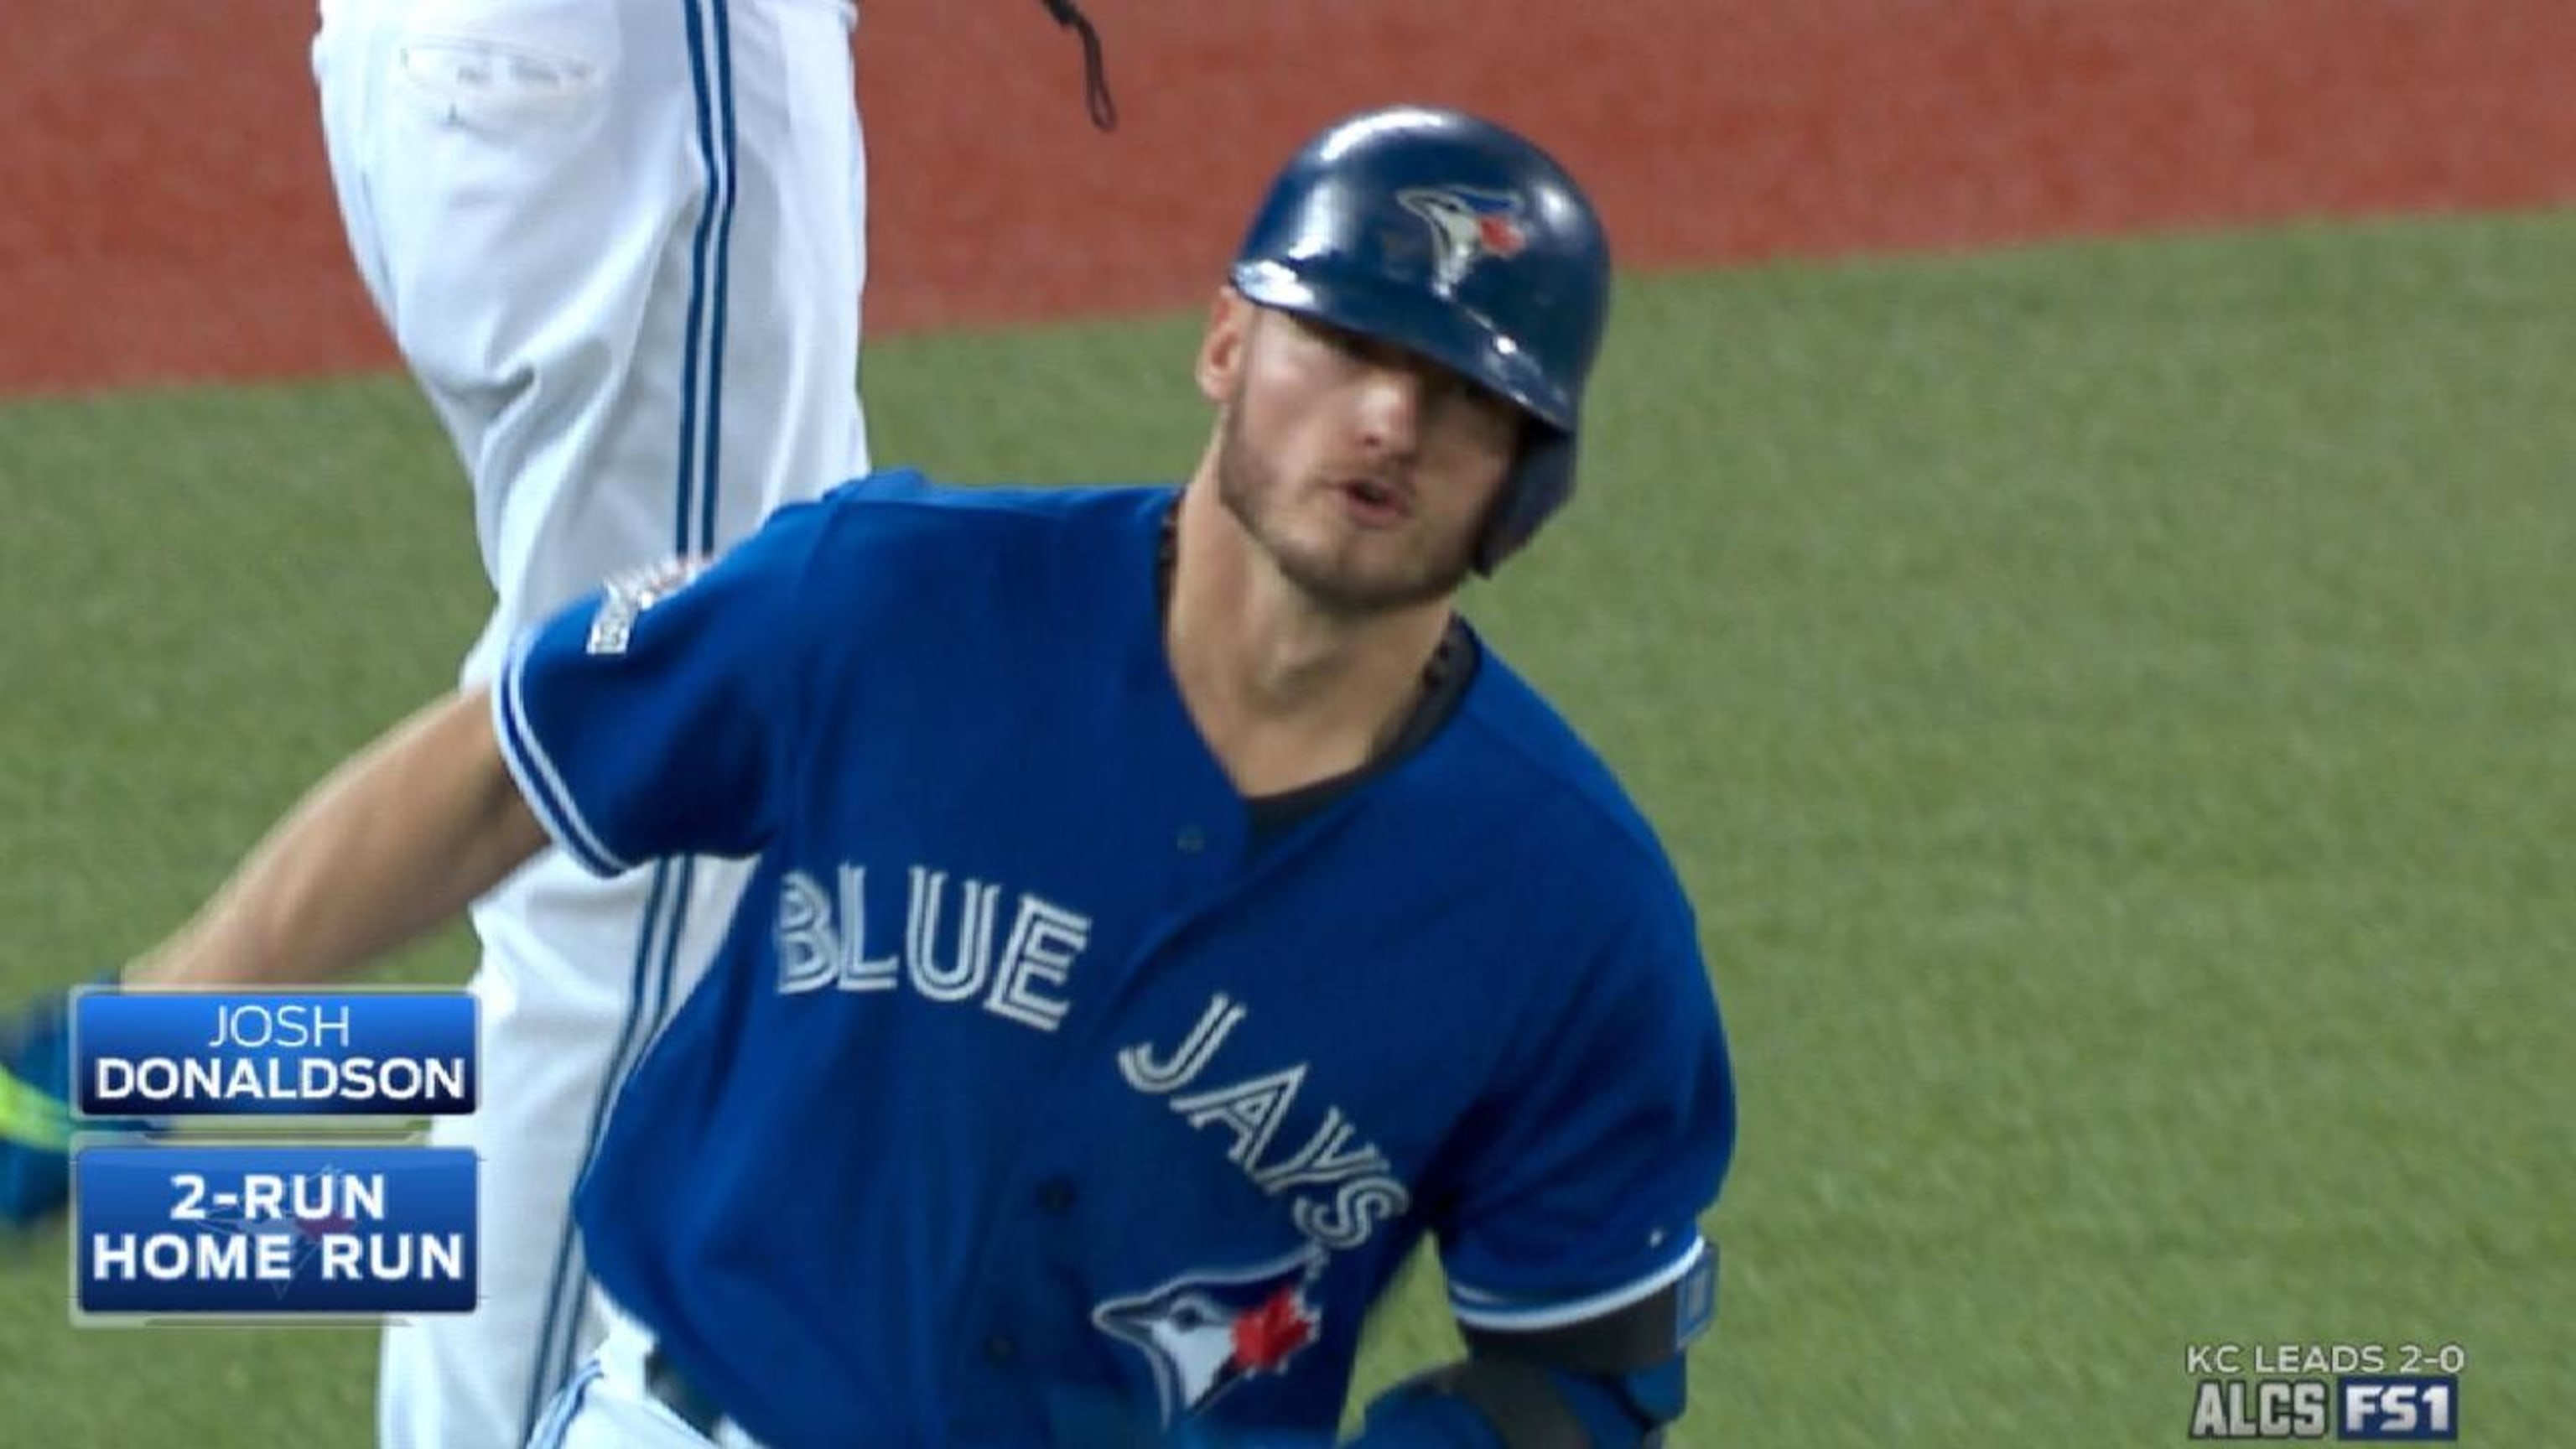 Josh Donaldson signs 2-year deal with Toronto Blue Jays: report